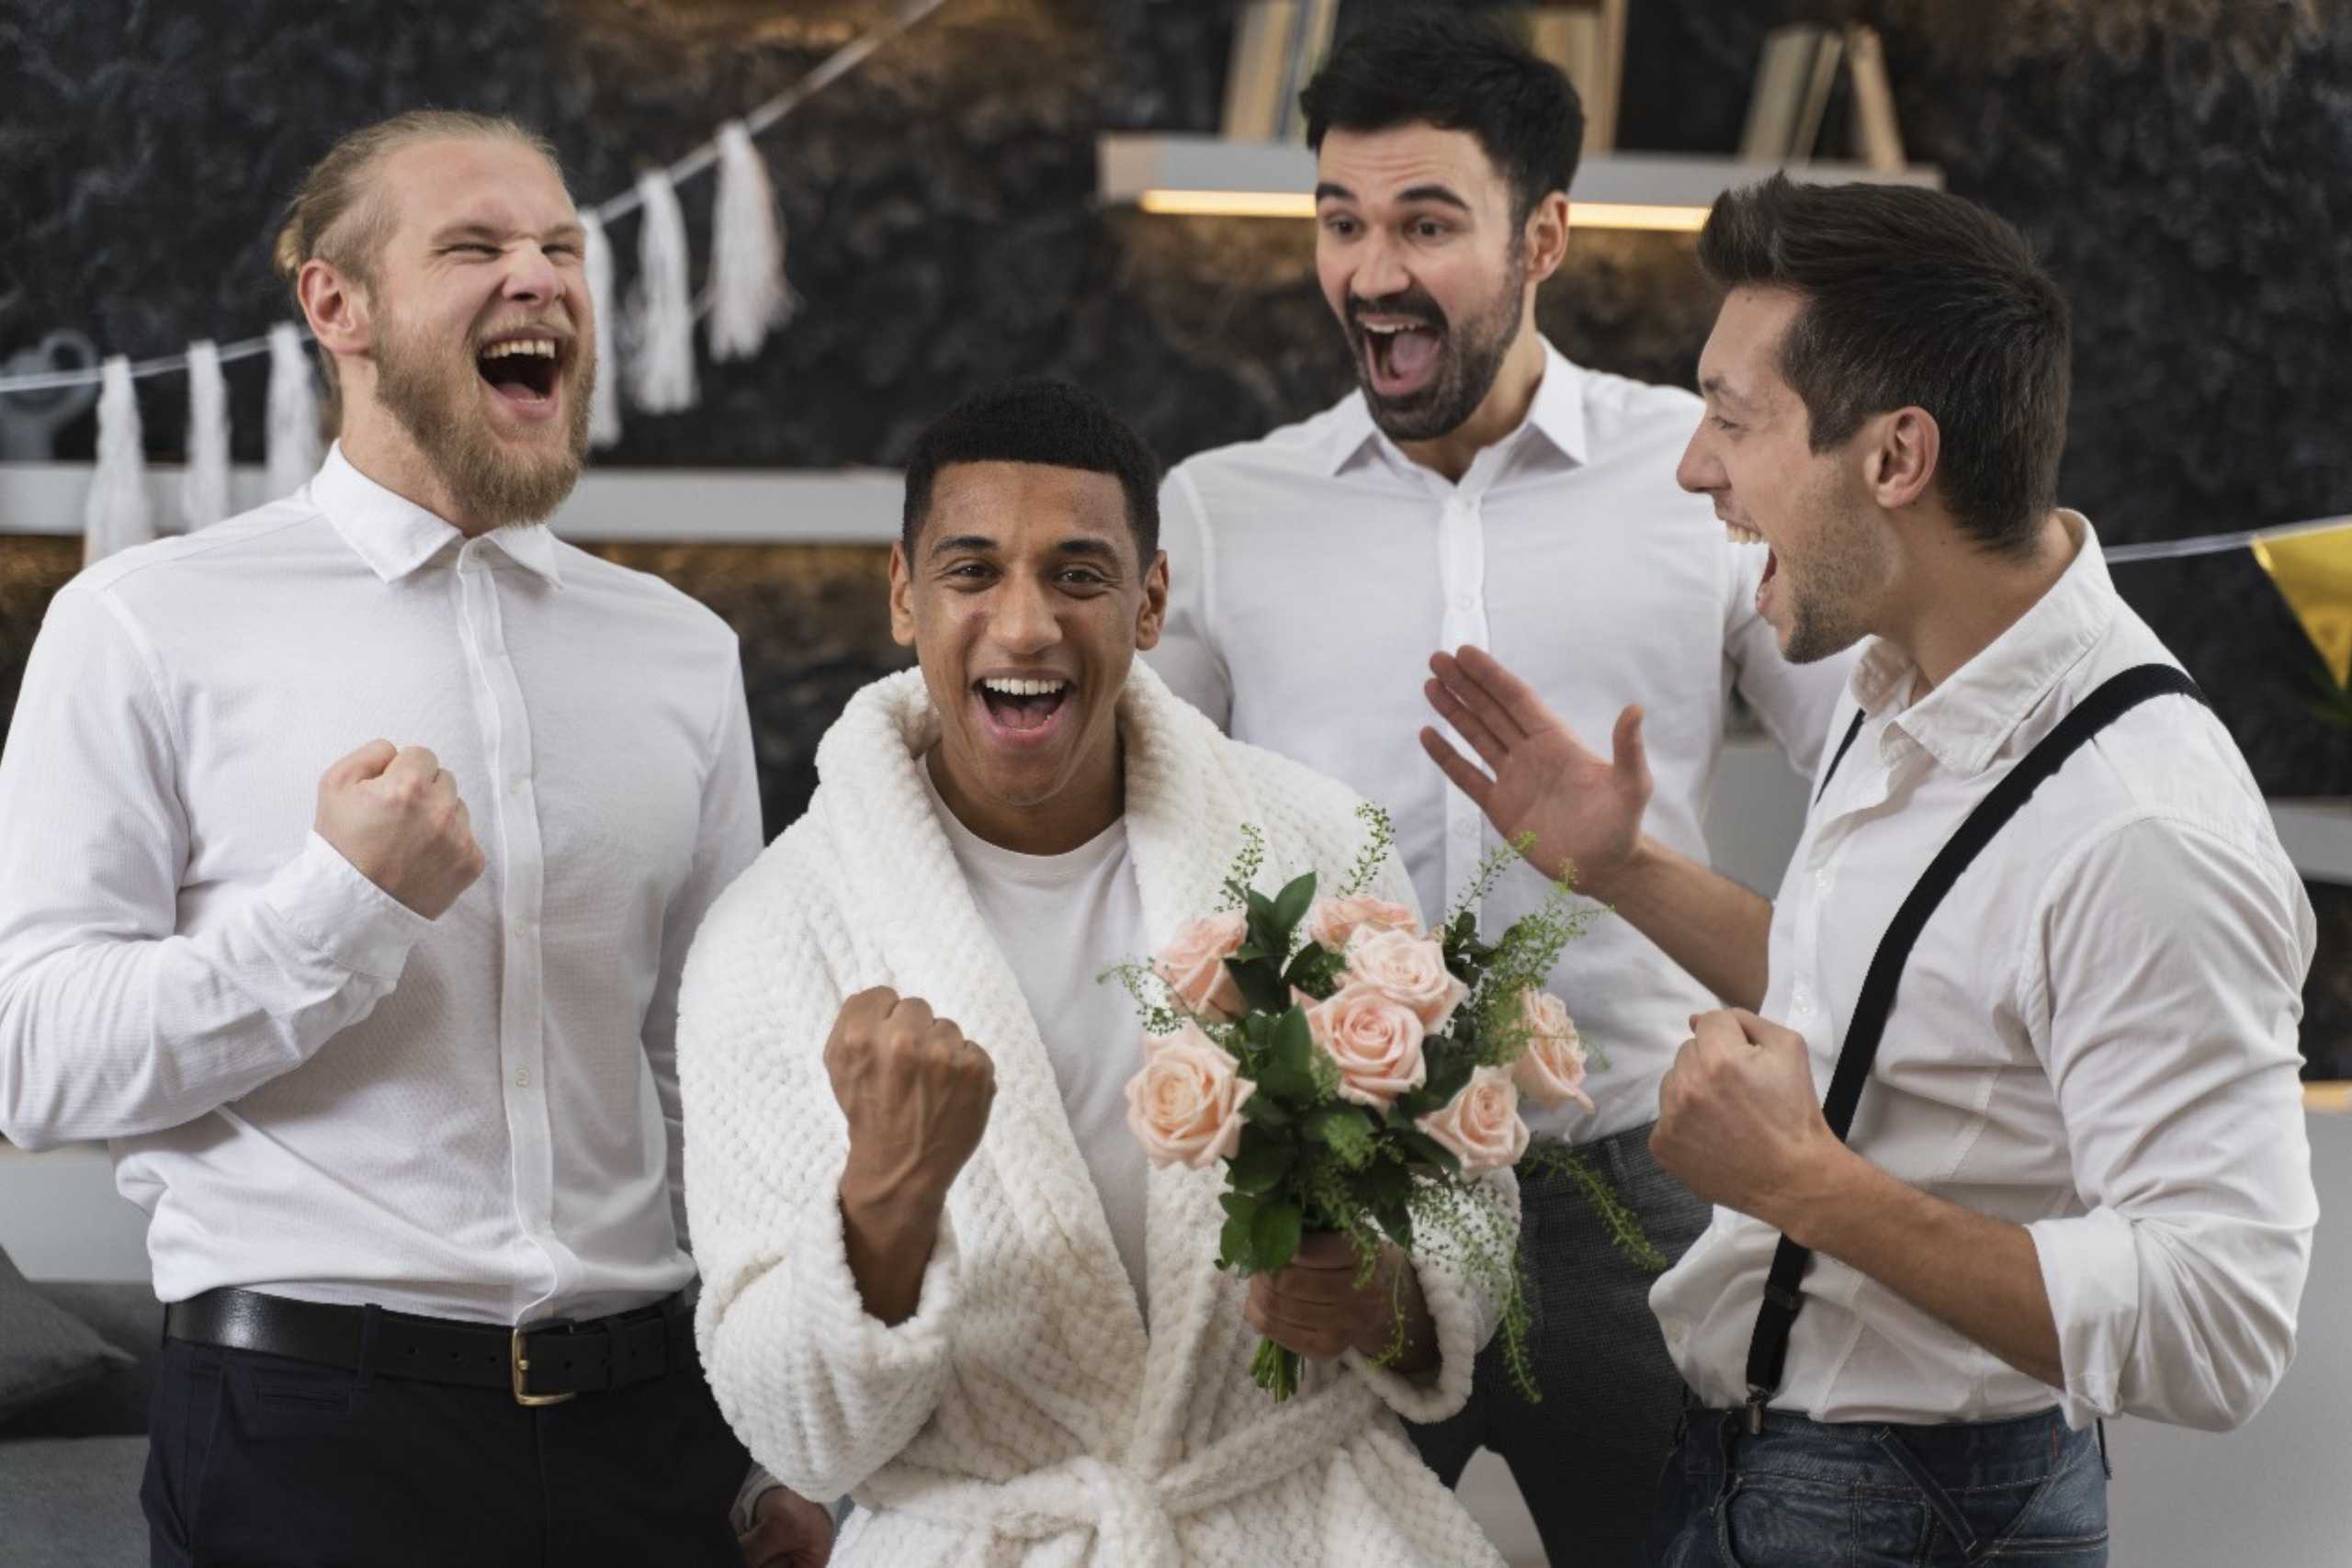 How to plan the Bachelor party